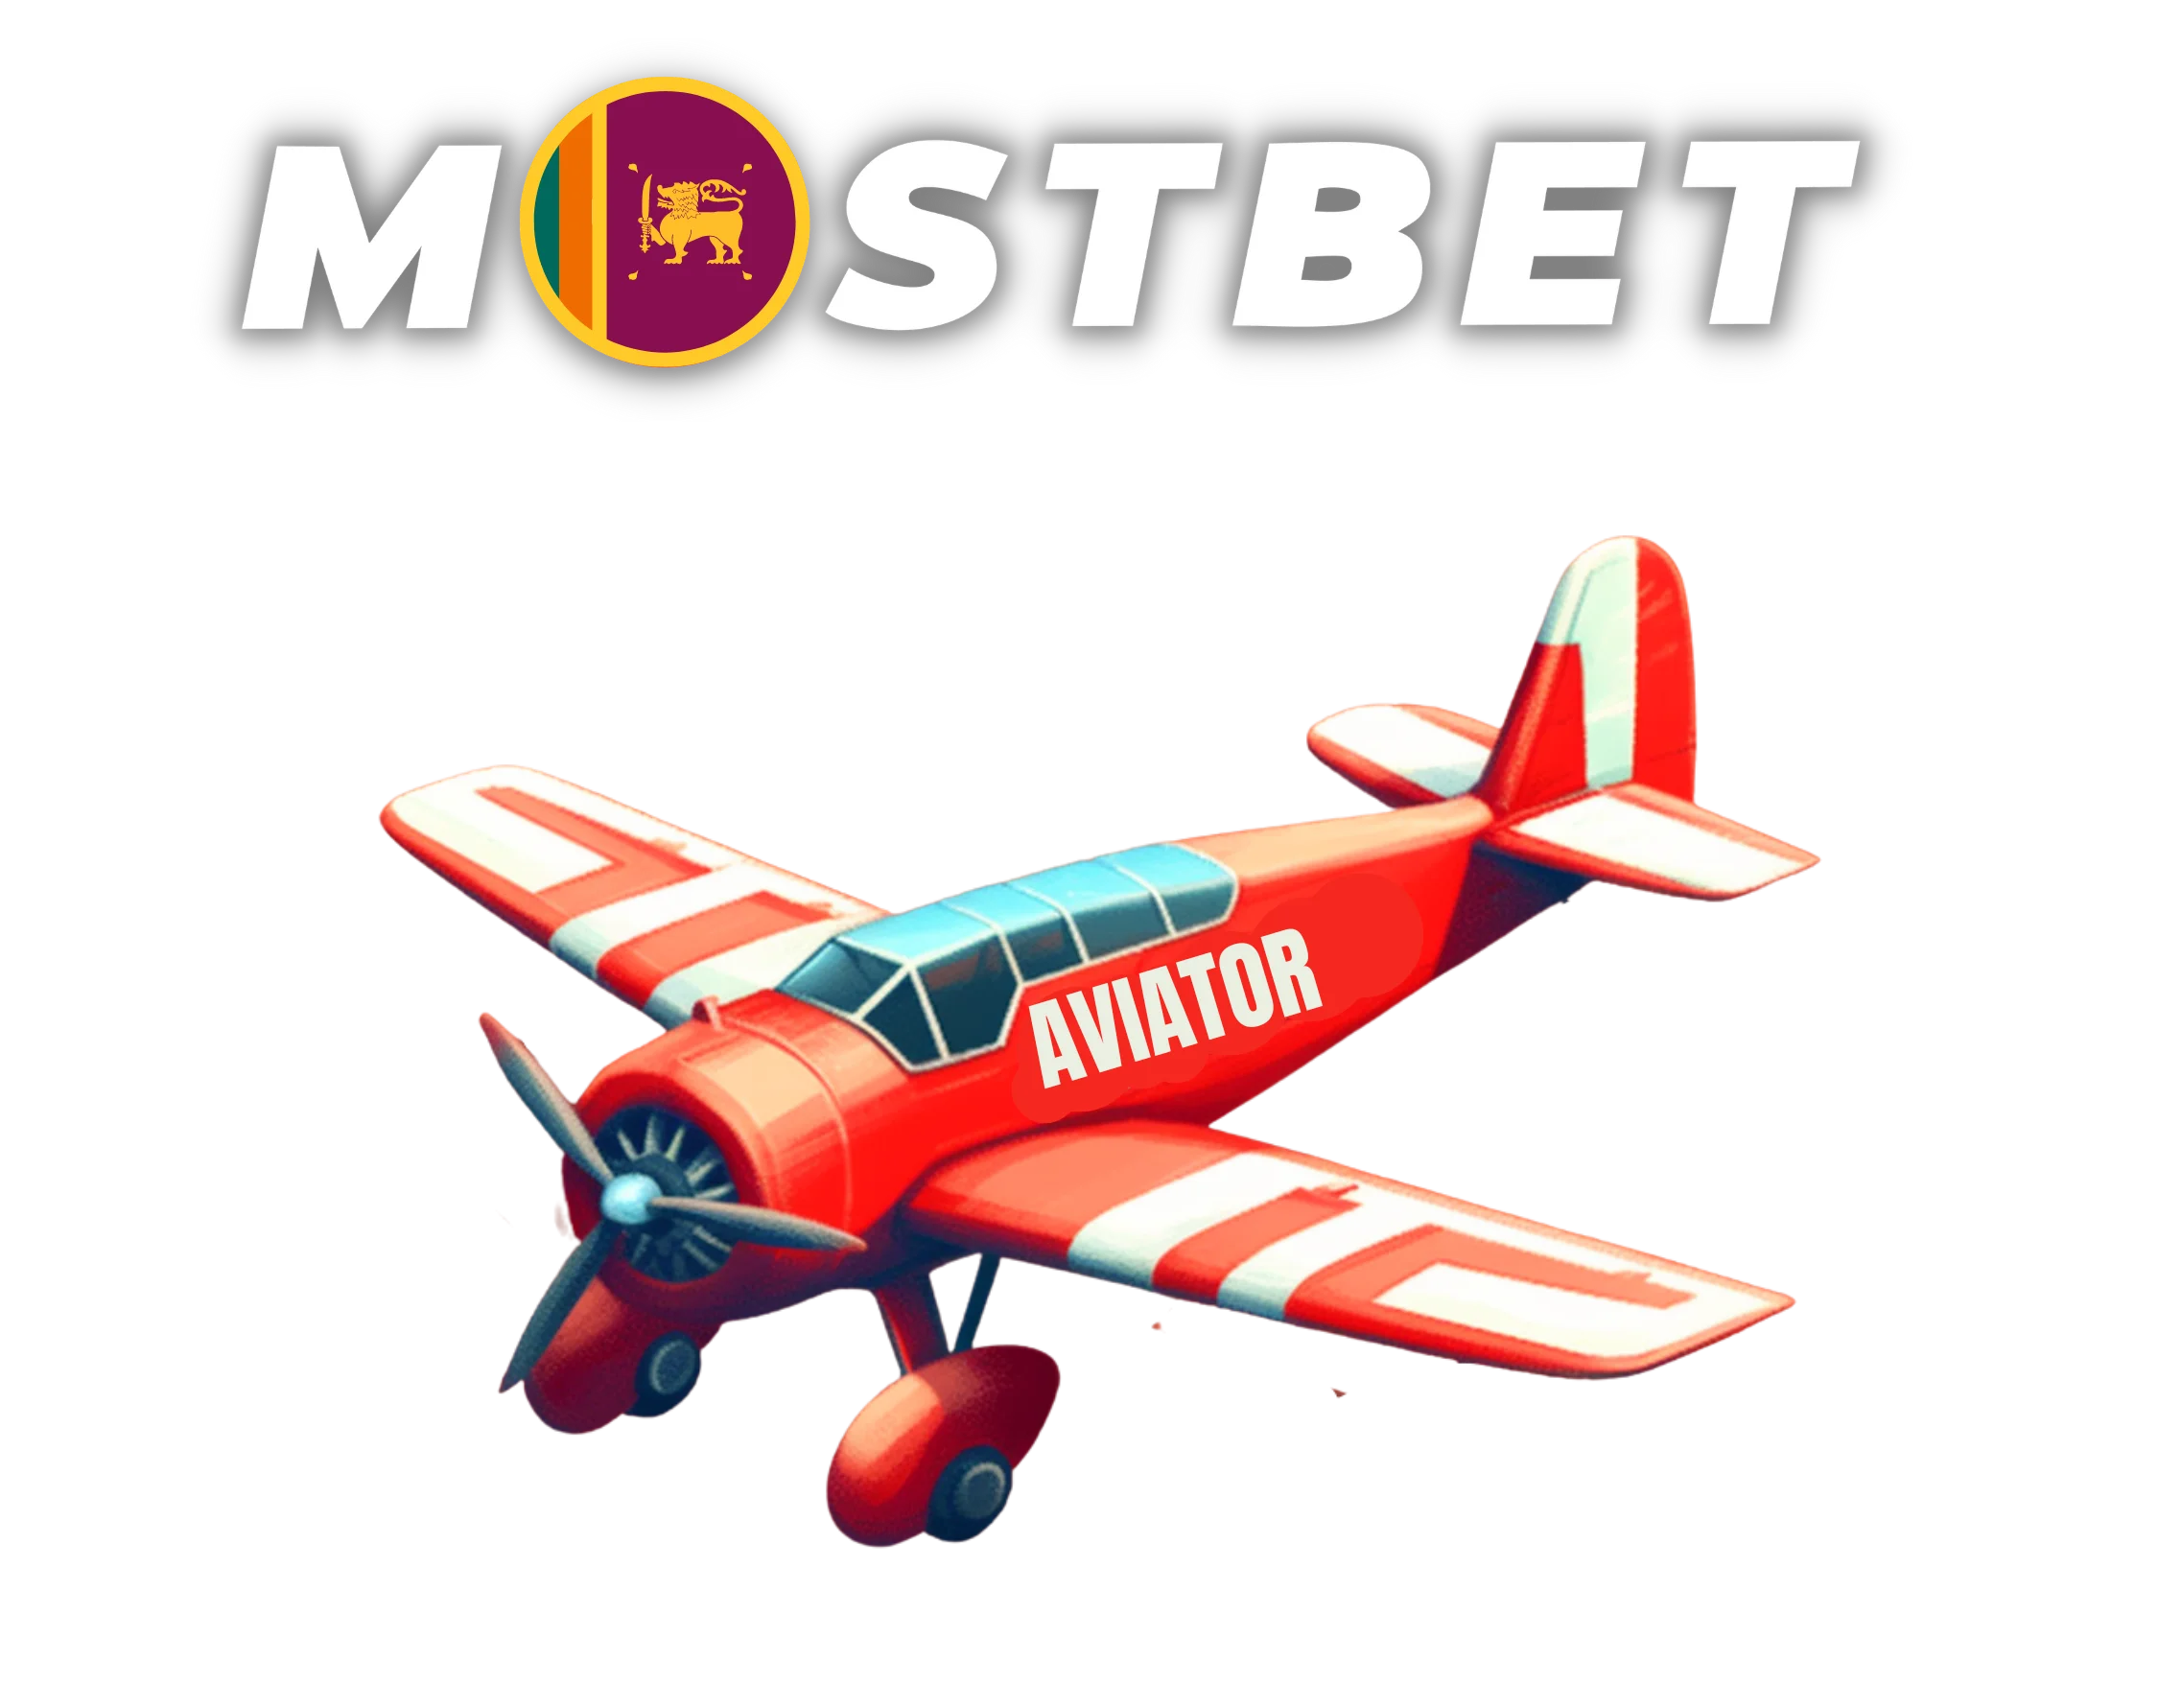 What Is Bookmaker Mostbet and online casino in Kazakhstan and How Does It Work?